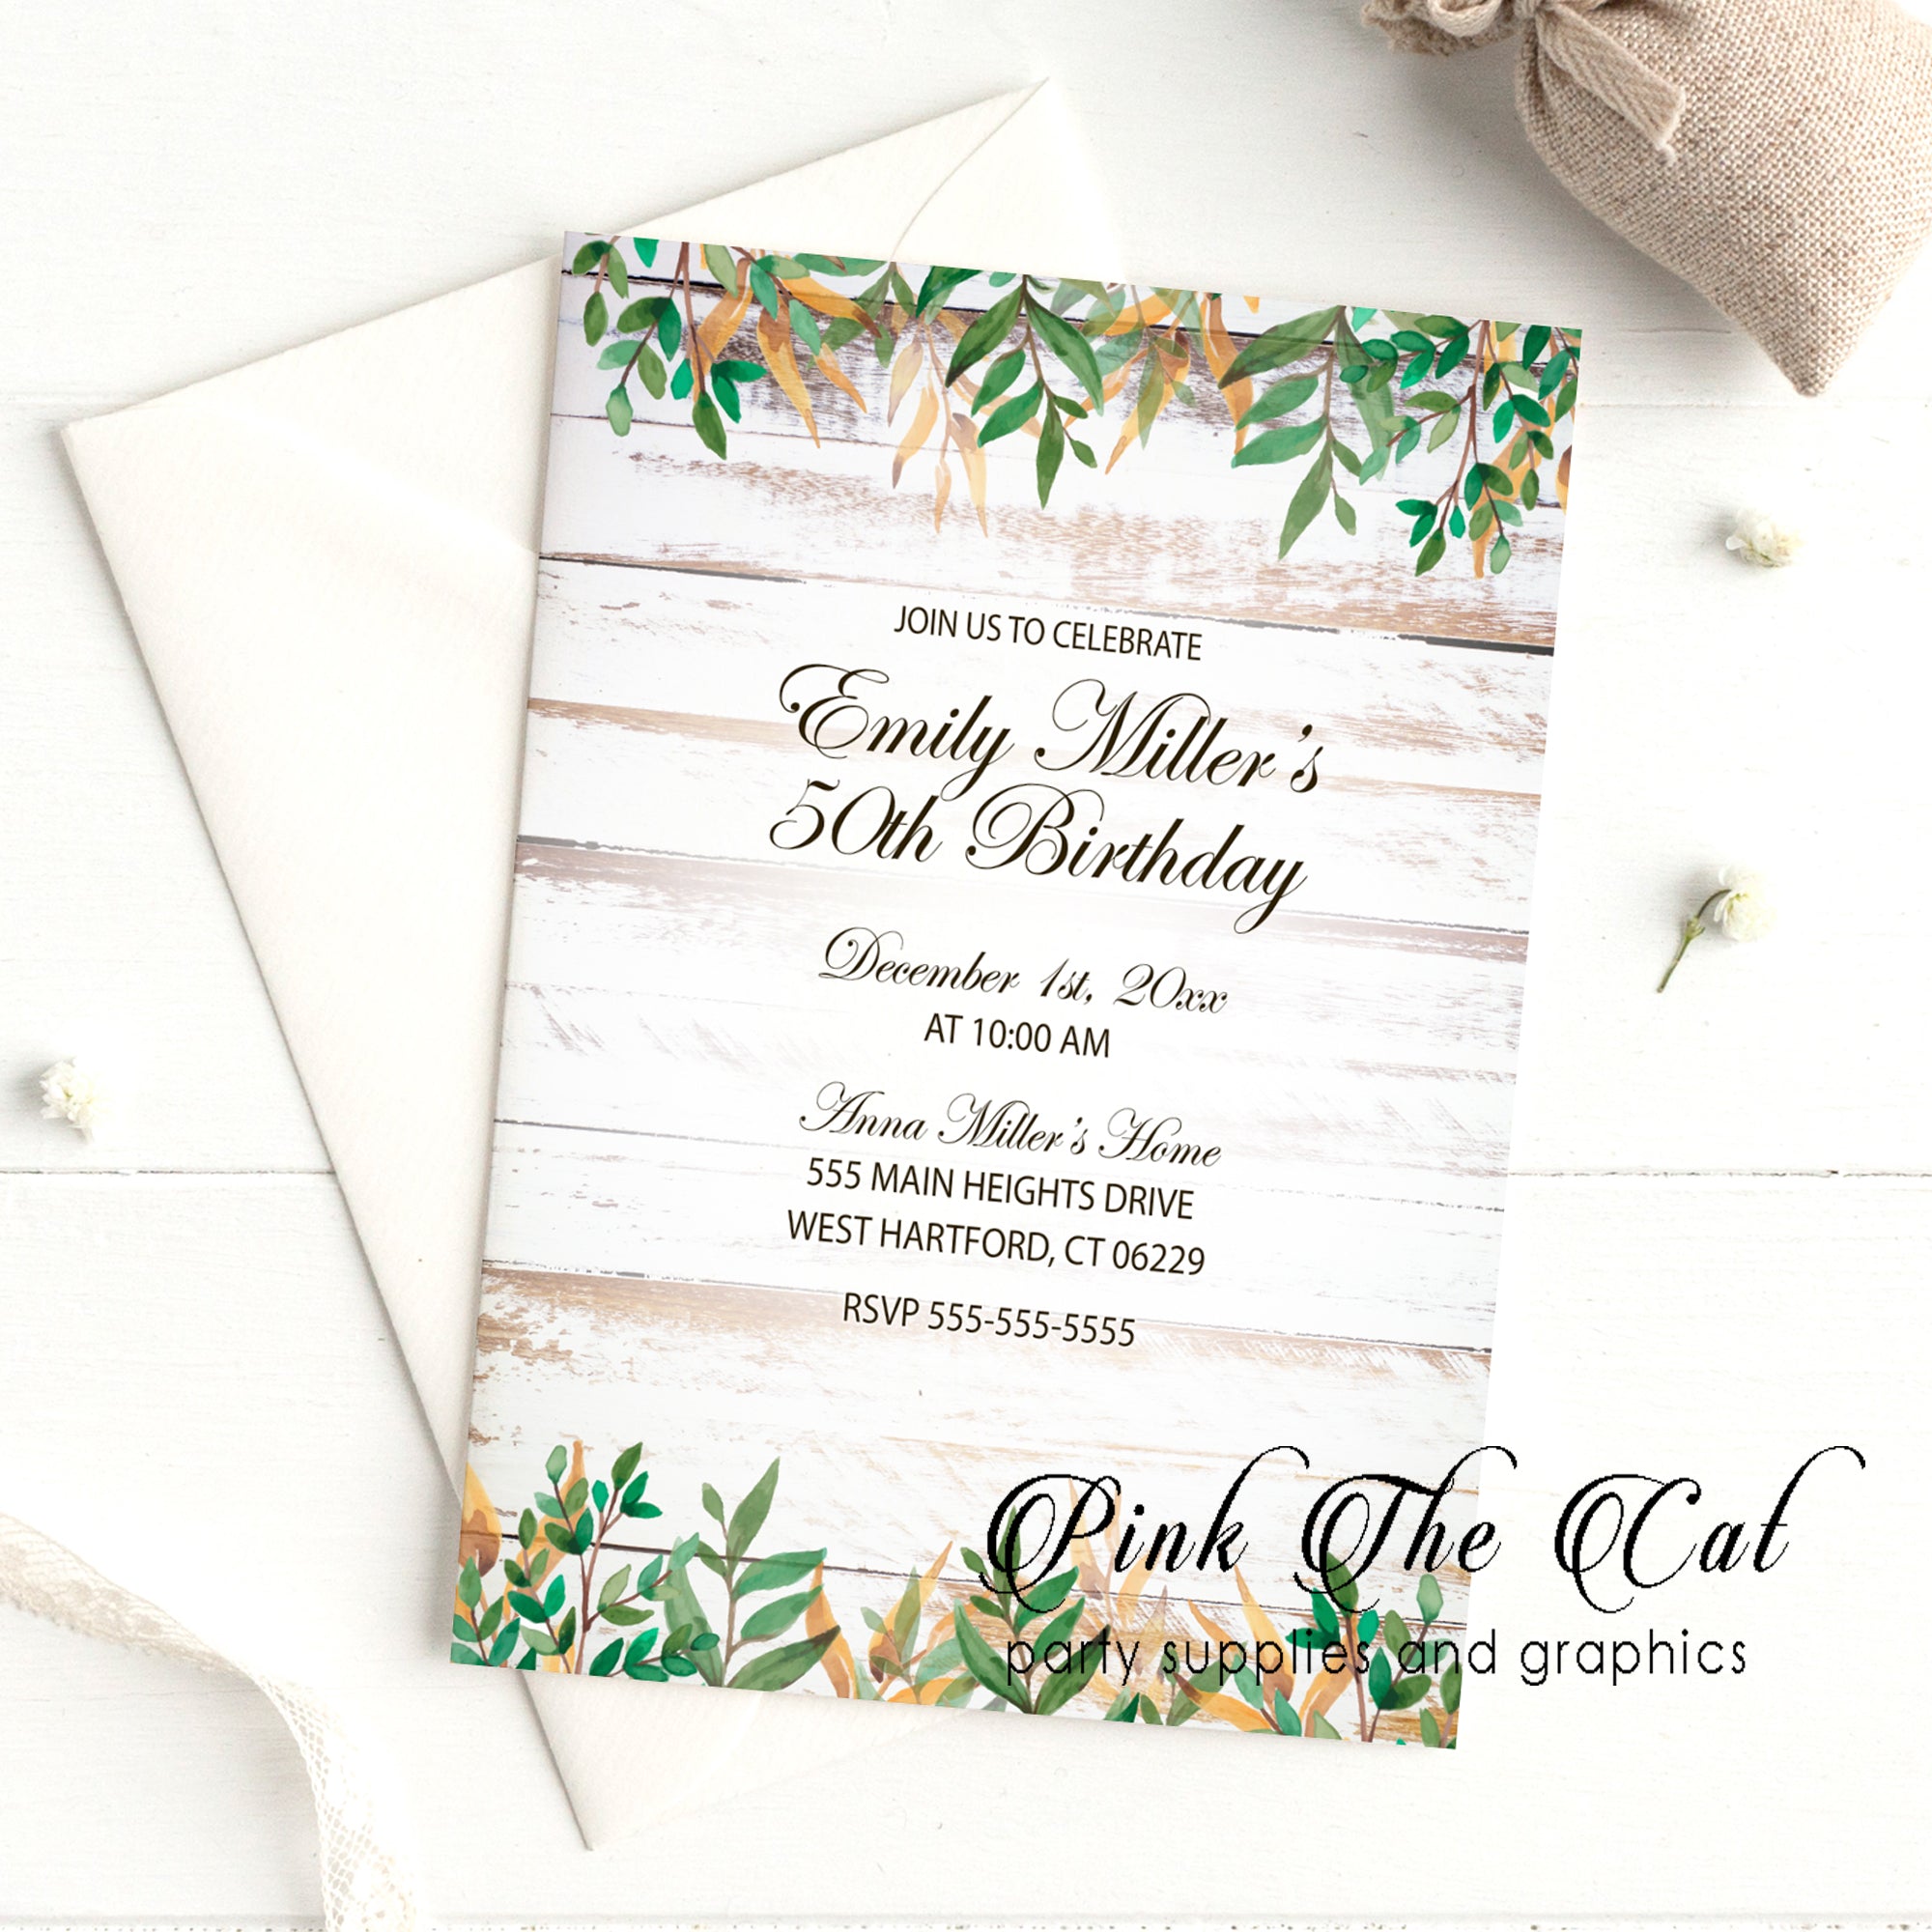 Rustic invitations white wood adult birthday party printable